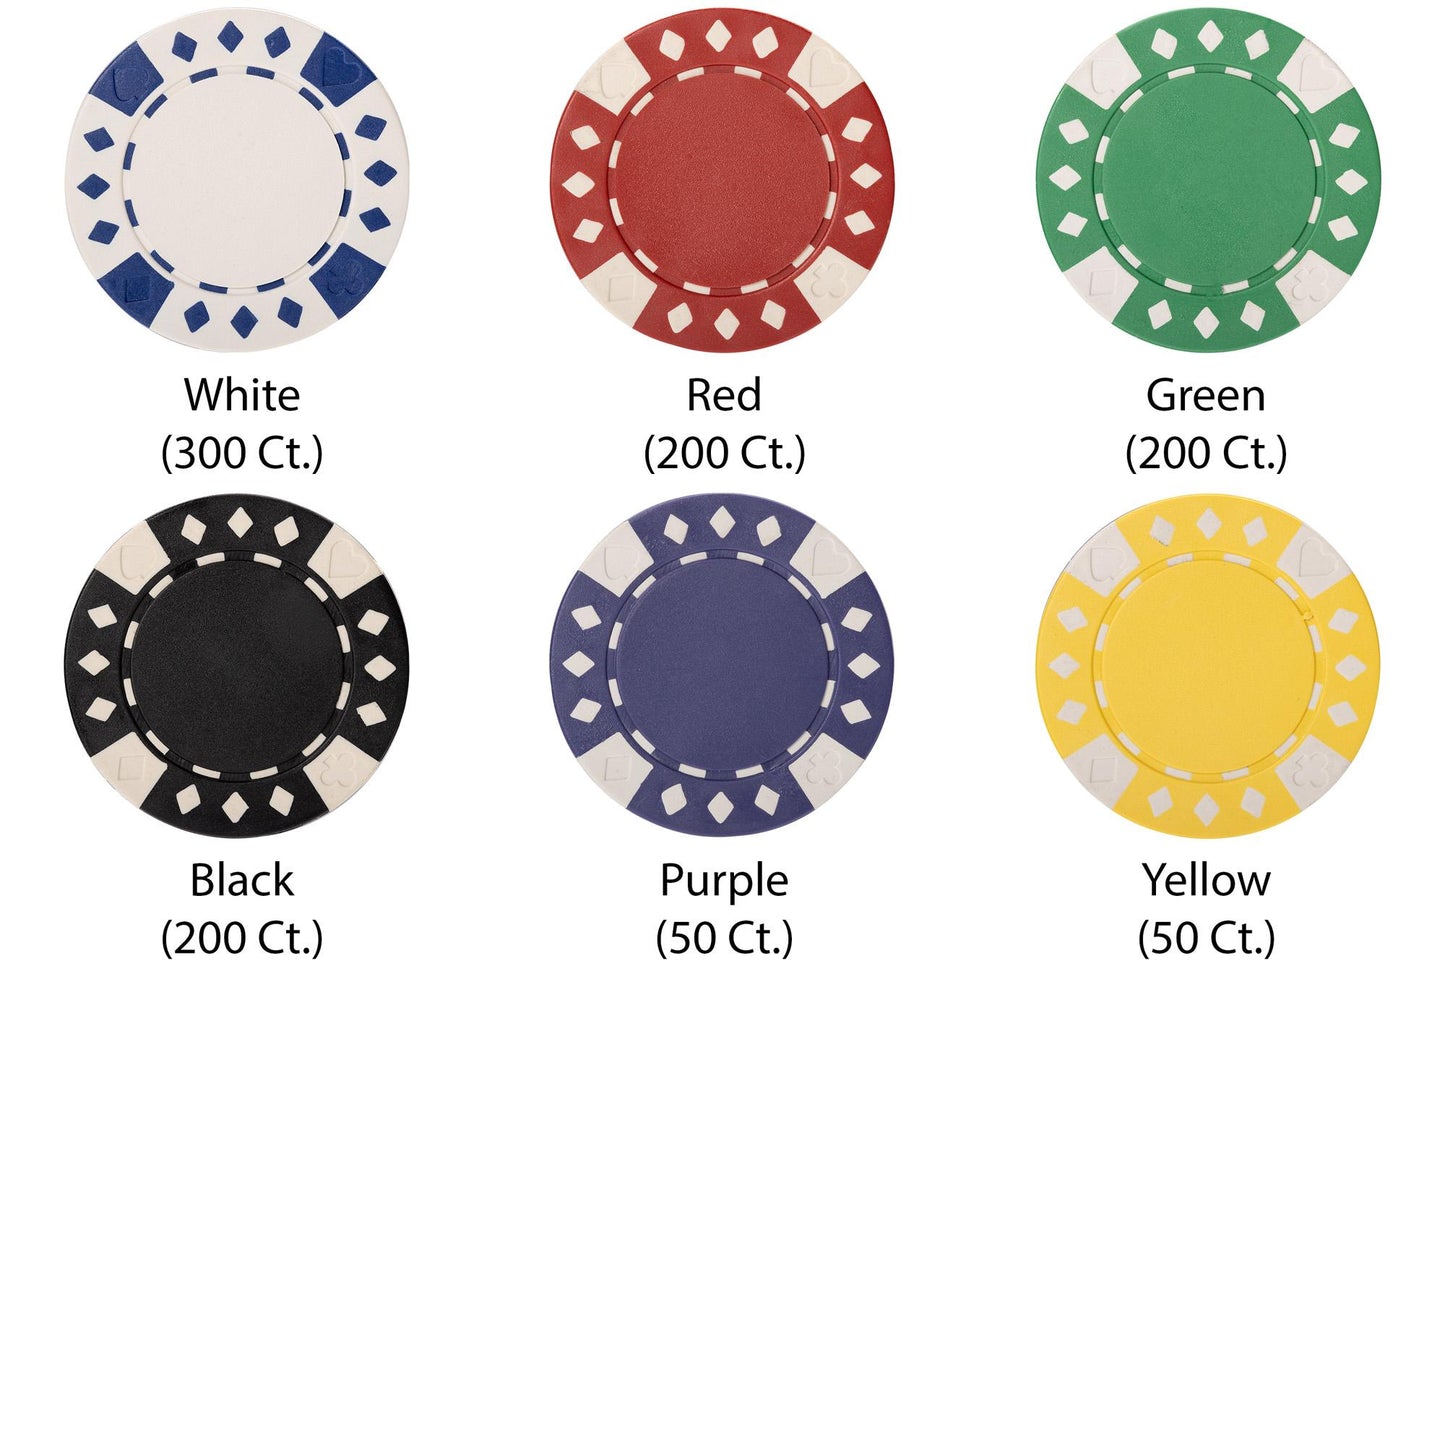 1000 Diamond Suited Poker Chips with Acrylic Carrier